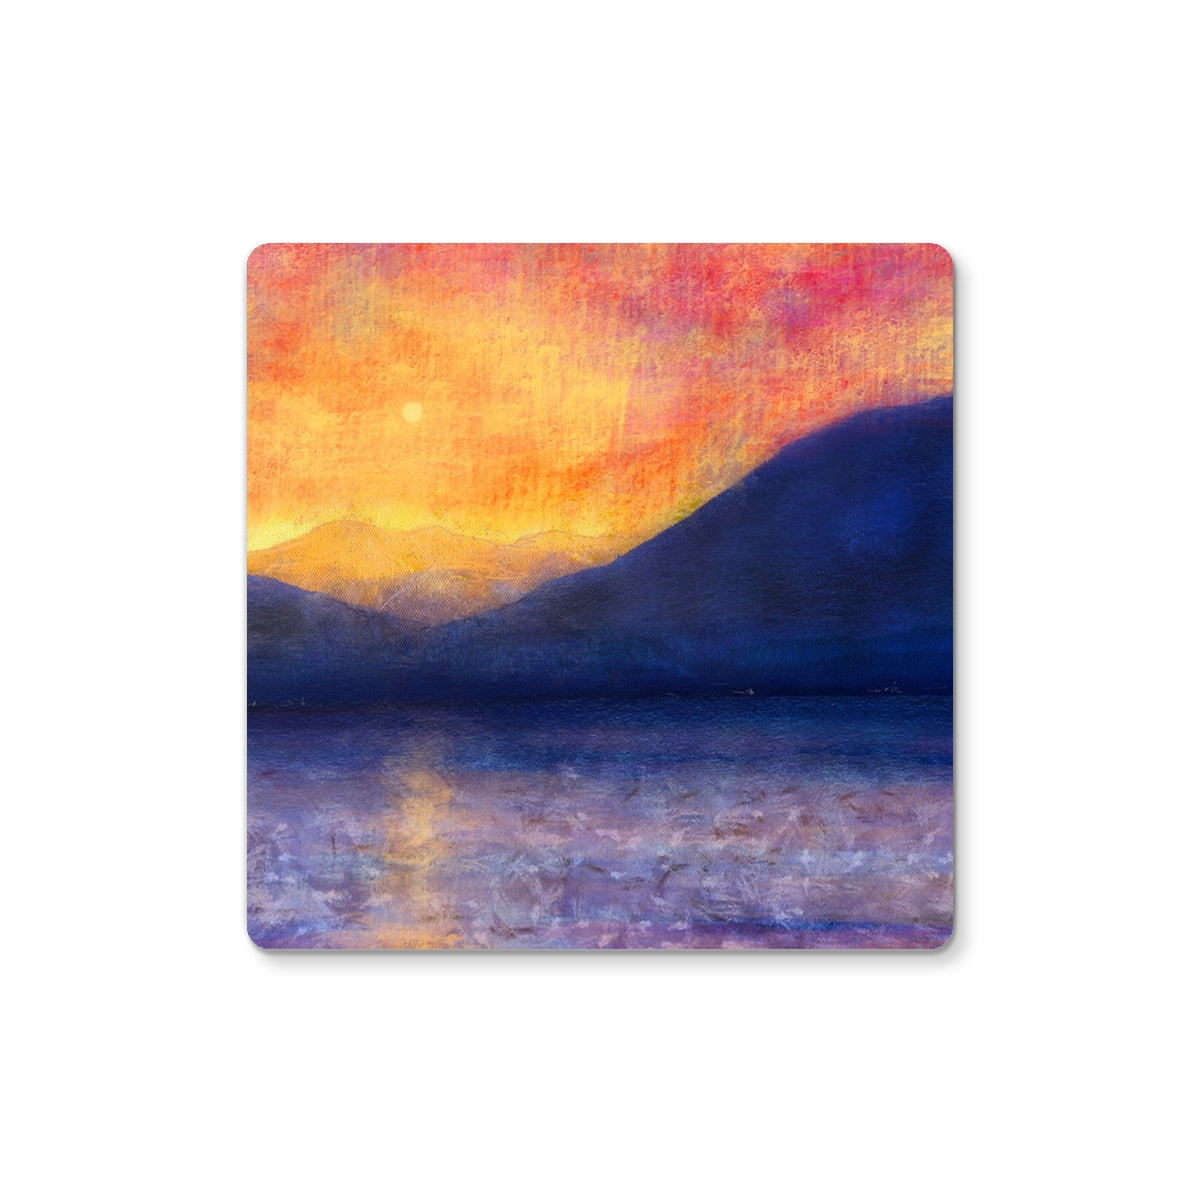 Sunset Approaching Mull Art Gifts Coaster-Coasters-Hebridean Islands Art Gallery-4 Coasters-Paintings, Prints, Homeware, Art Gifts From Scotland By Scottish Artist Kevin Hunter